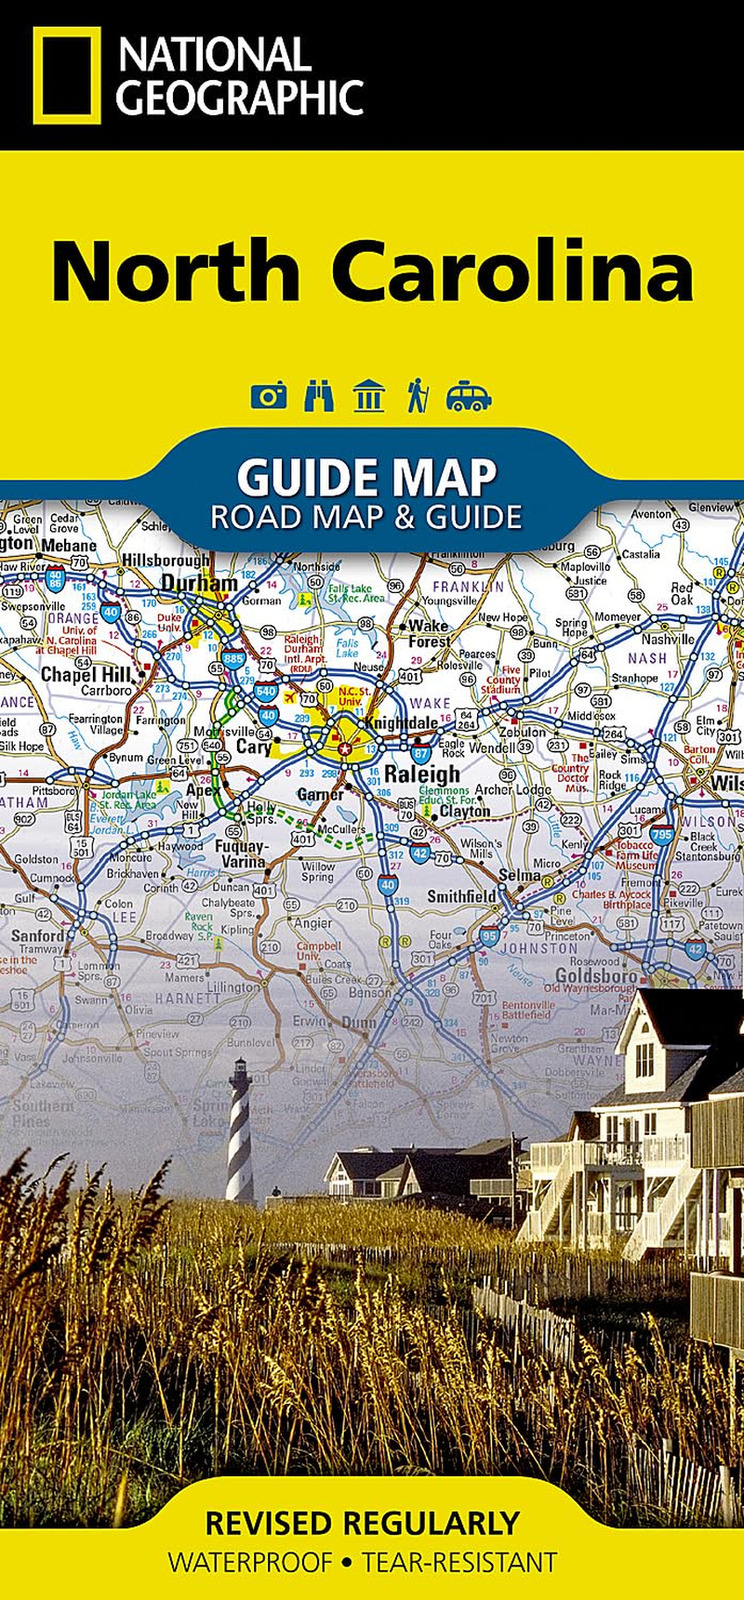 North Carolina Map (National Geographic Guide Map) - NEW